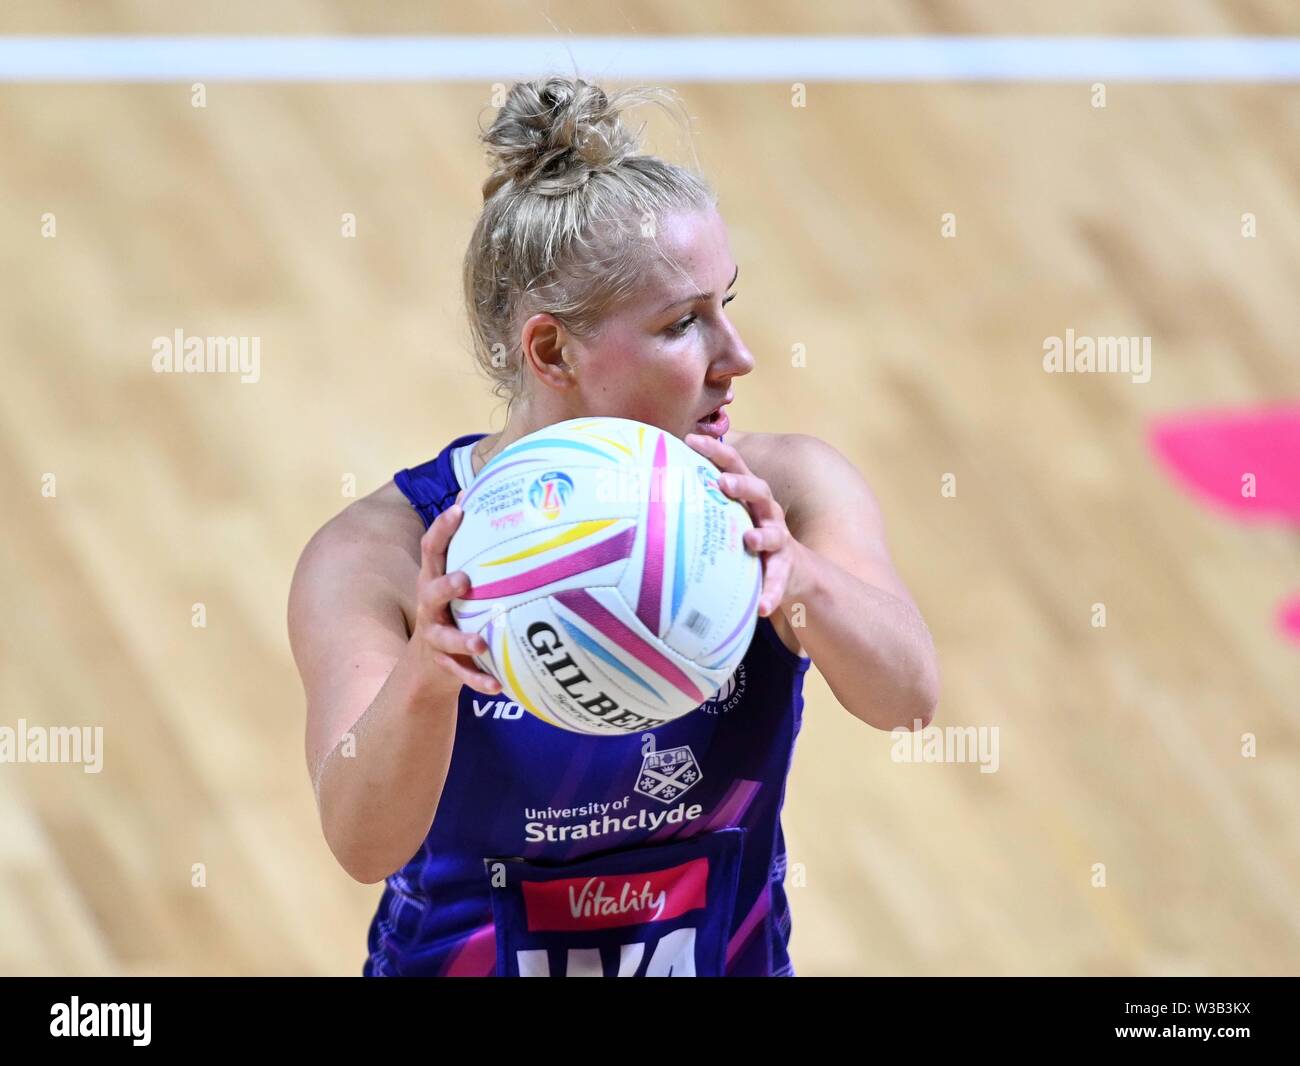 Liverpool, UK. 14 July 2019. Nicola McCleery (Scotland) during the Preliminary game between Uganda and Scotland at the Netball World Cup. M and S arena, Liverpool. Merseyside. UK. Credit Garry Bowdenh/SIP photo agency/Alamy live news. Stock Photo